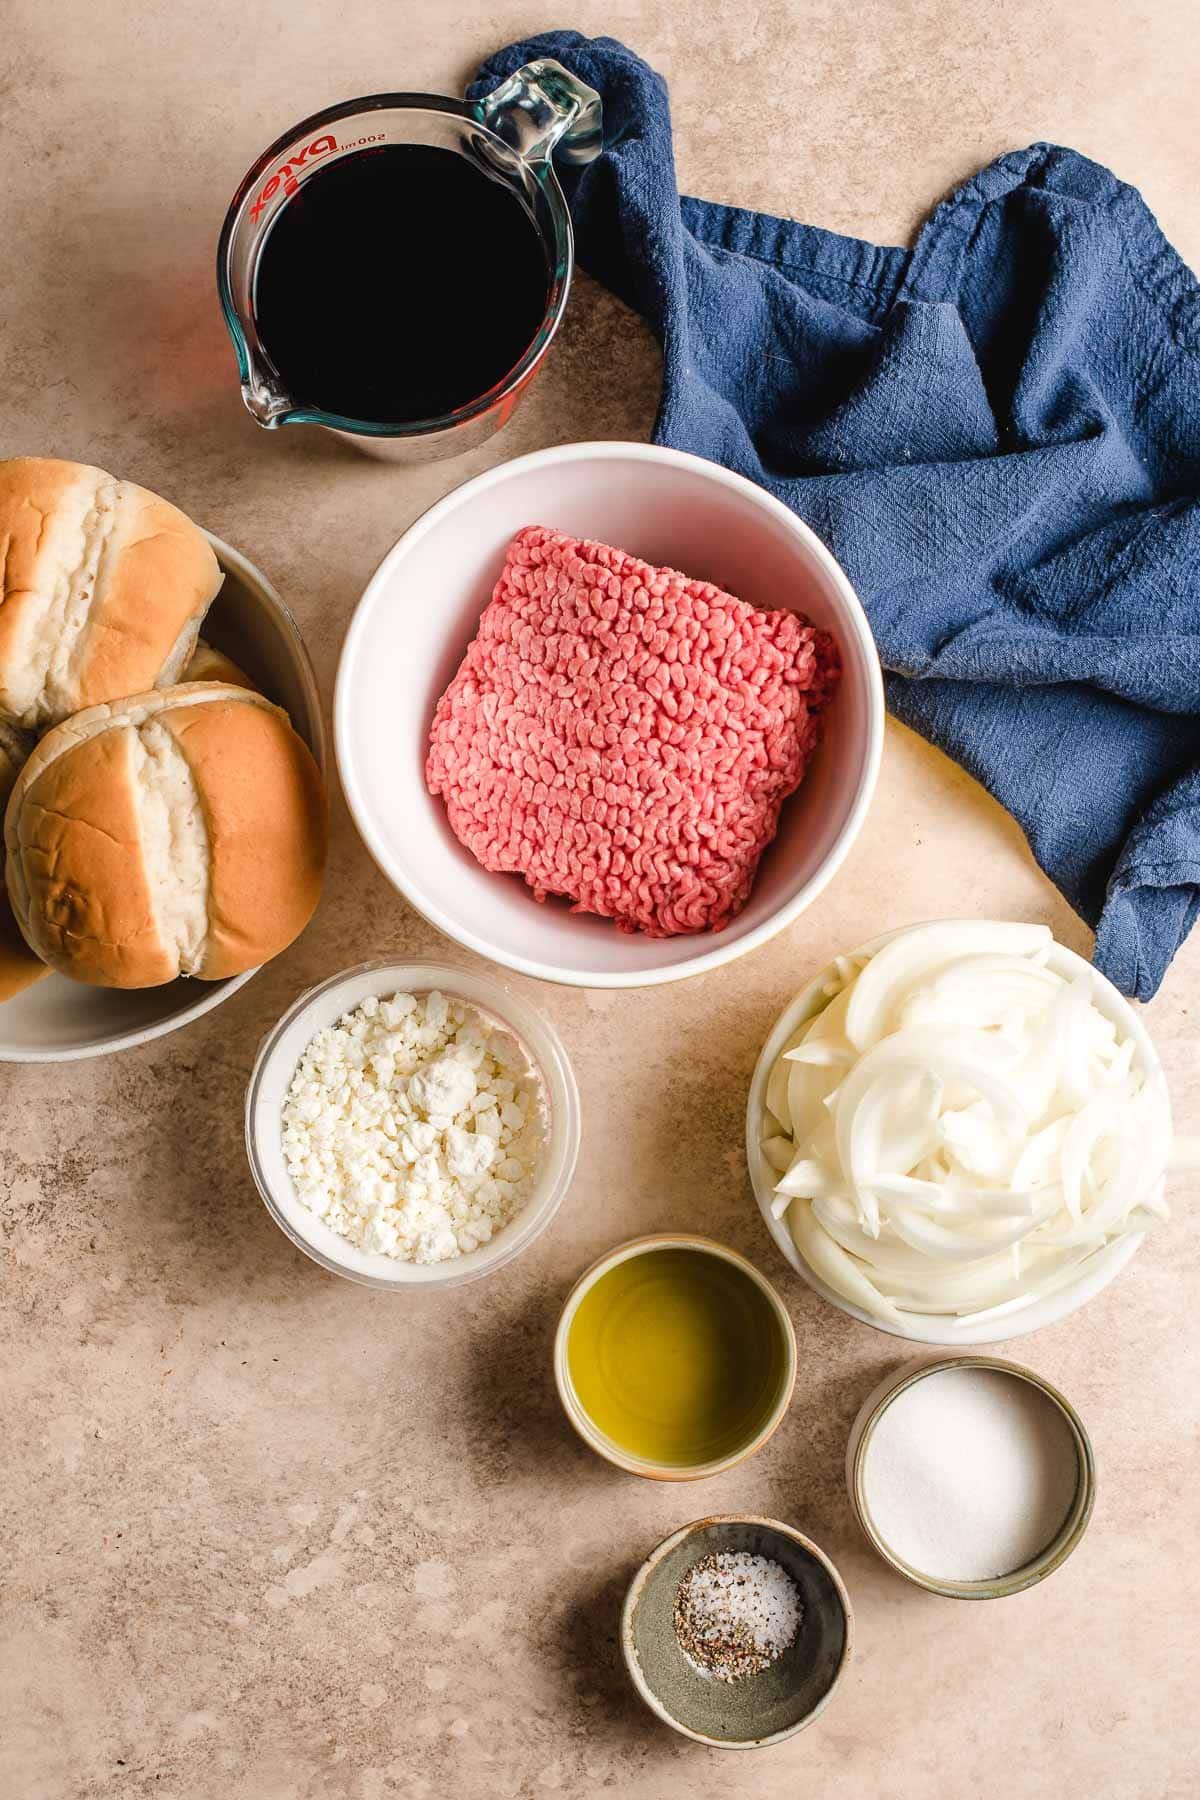 Ingredients for goat cheese burgers in bowls.